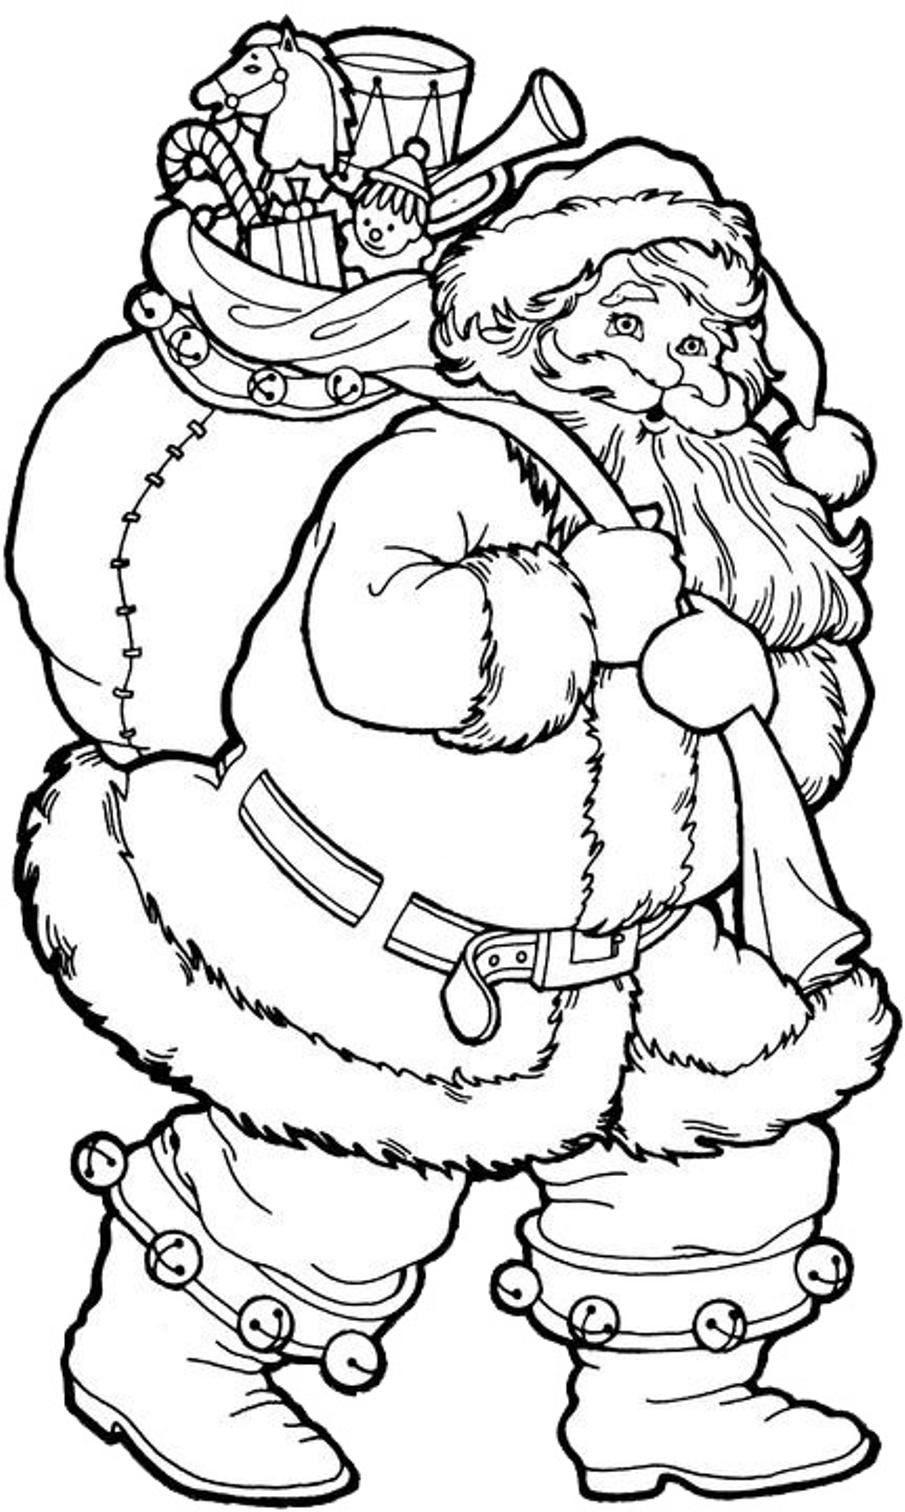 Father Christmas Coloring Pages at GetColorings.com | Free printable ...